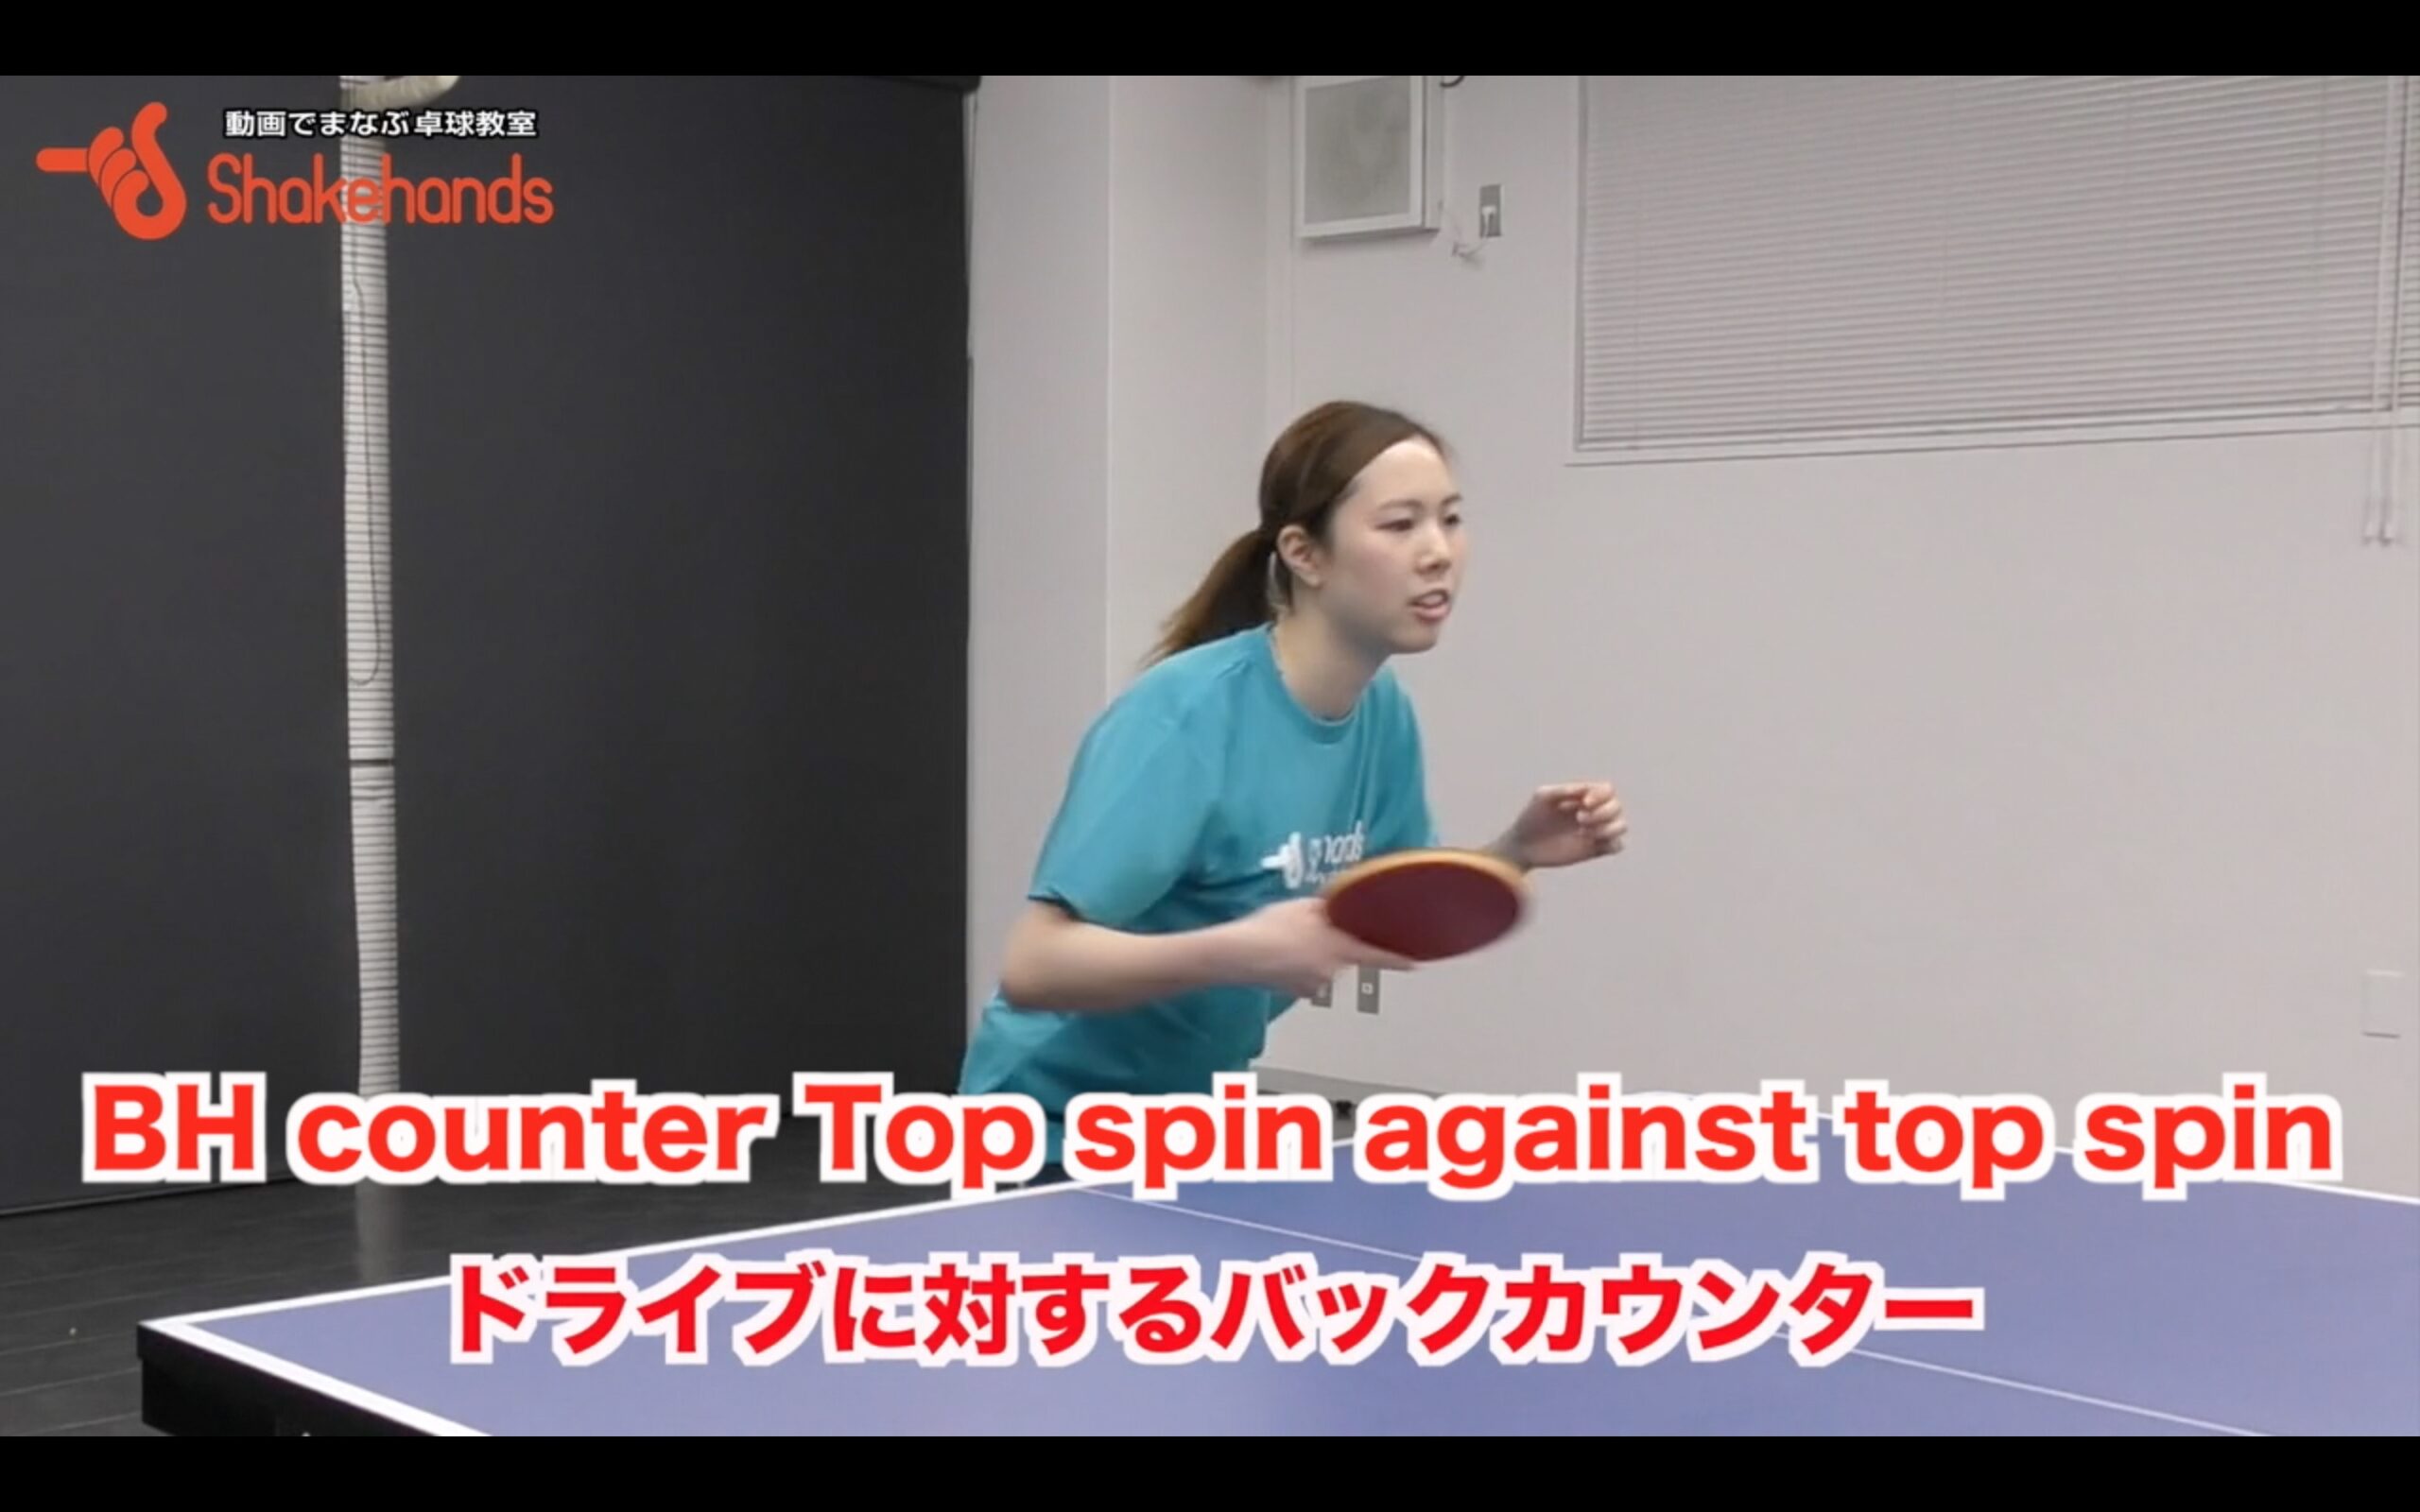 BH counter top spin against top spin